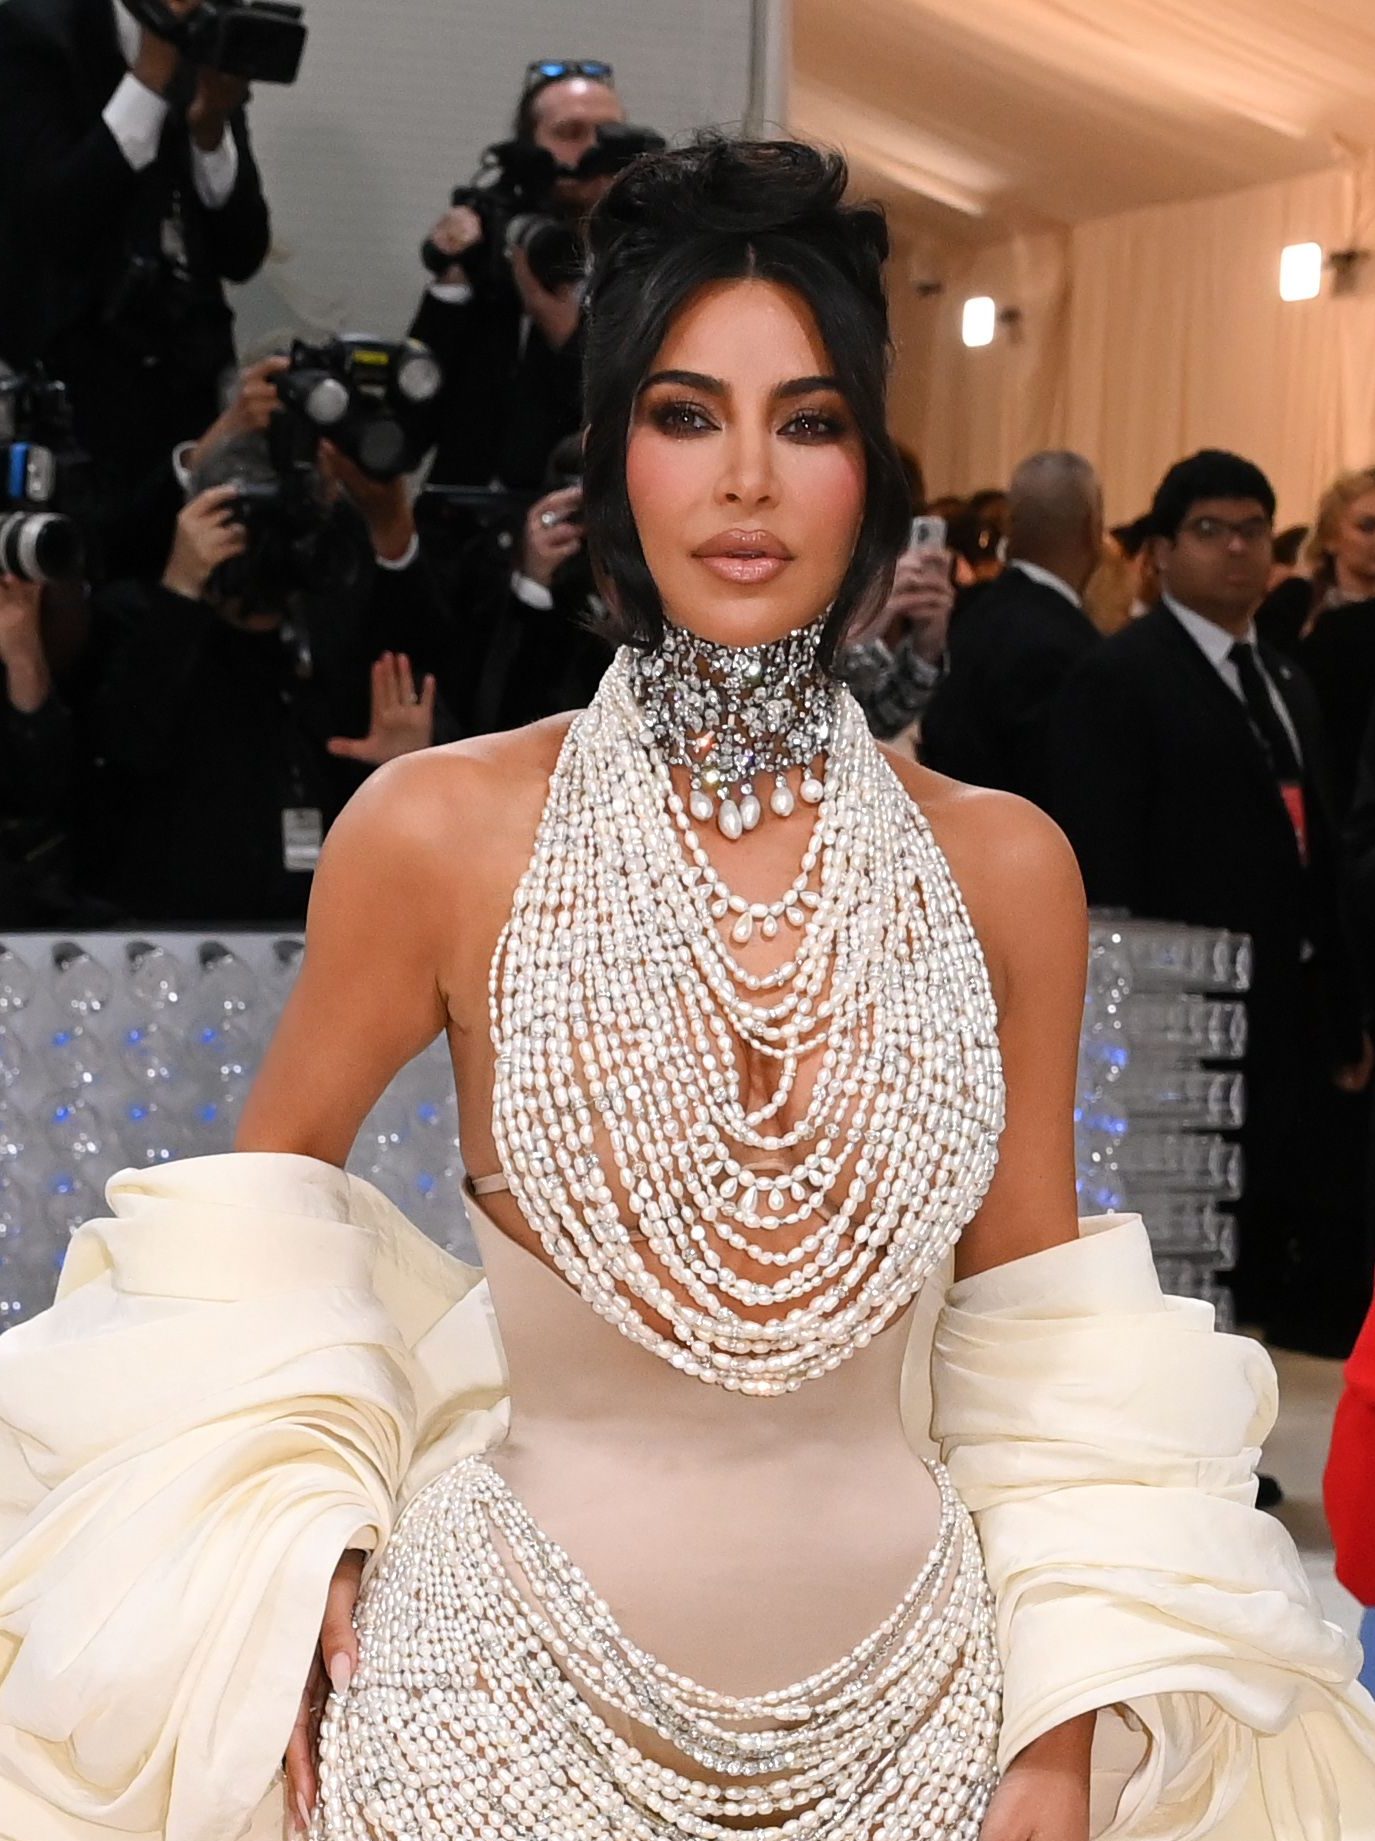 Kim Kardashian Called Out For 'Pretending' She Attended The Oscars - Capital